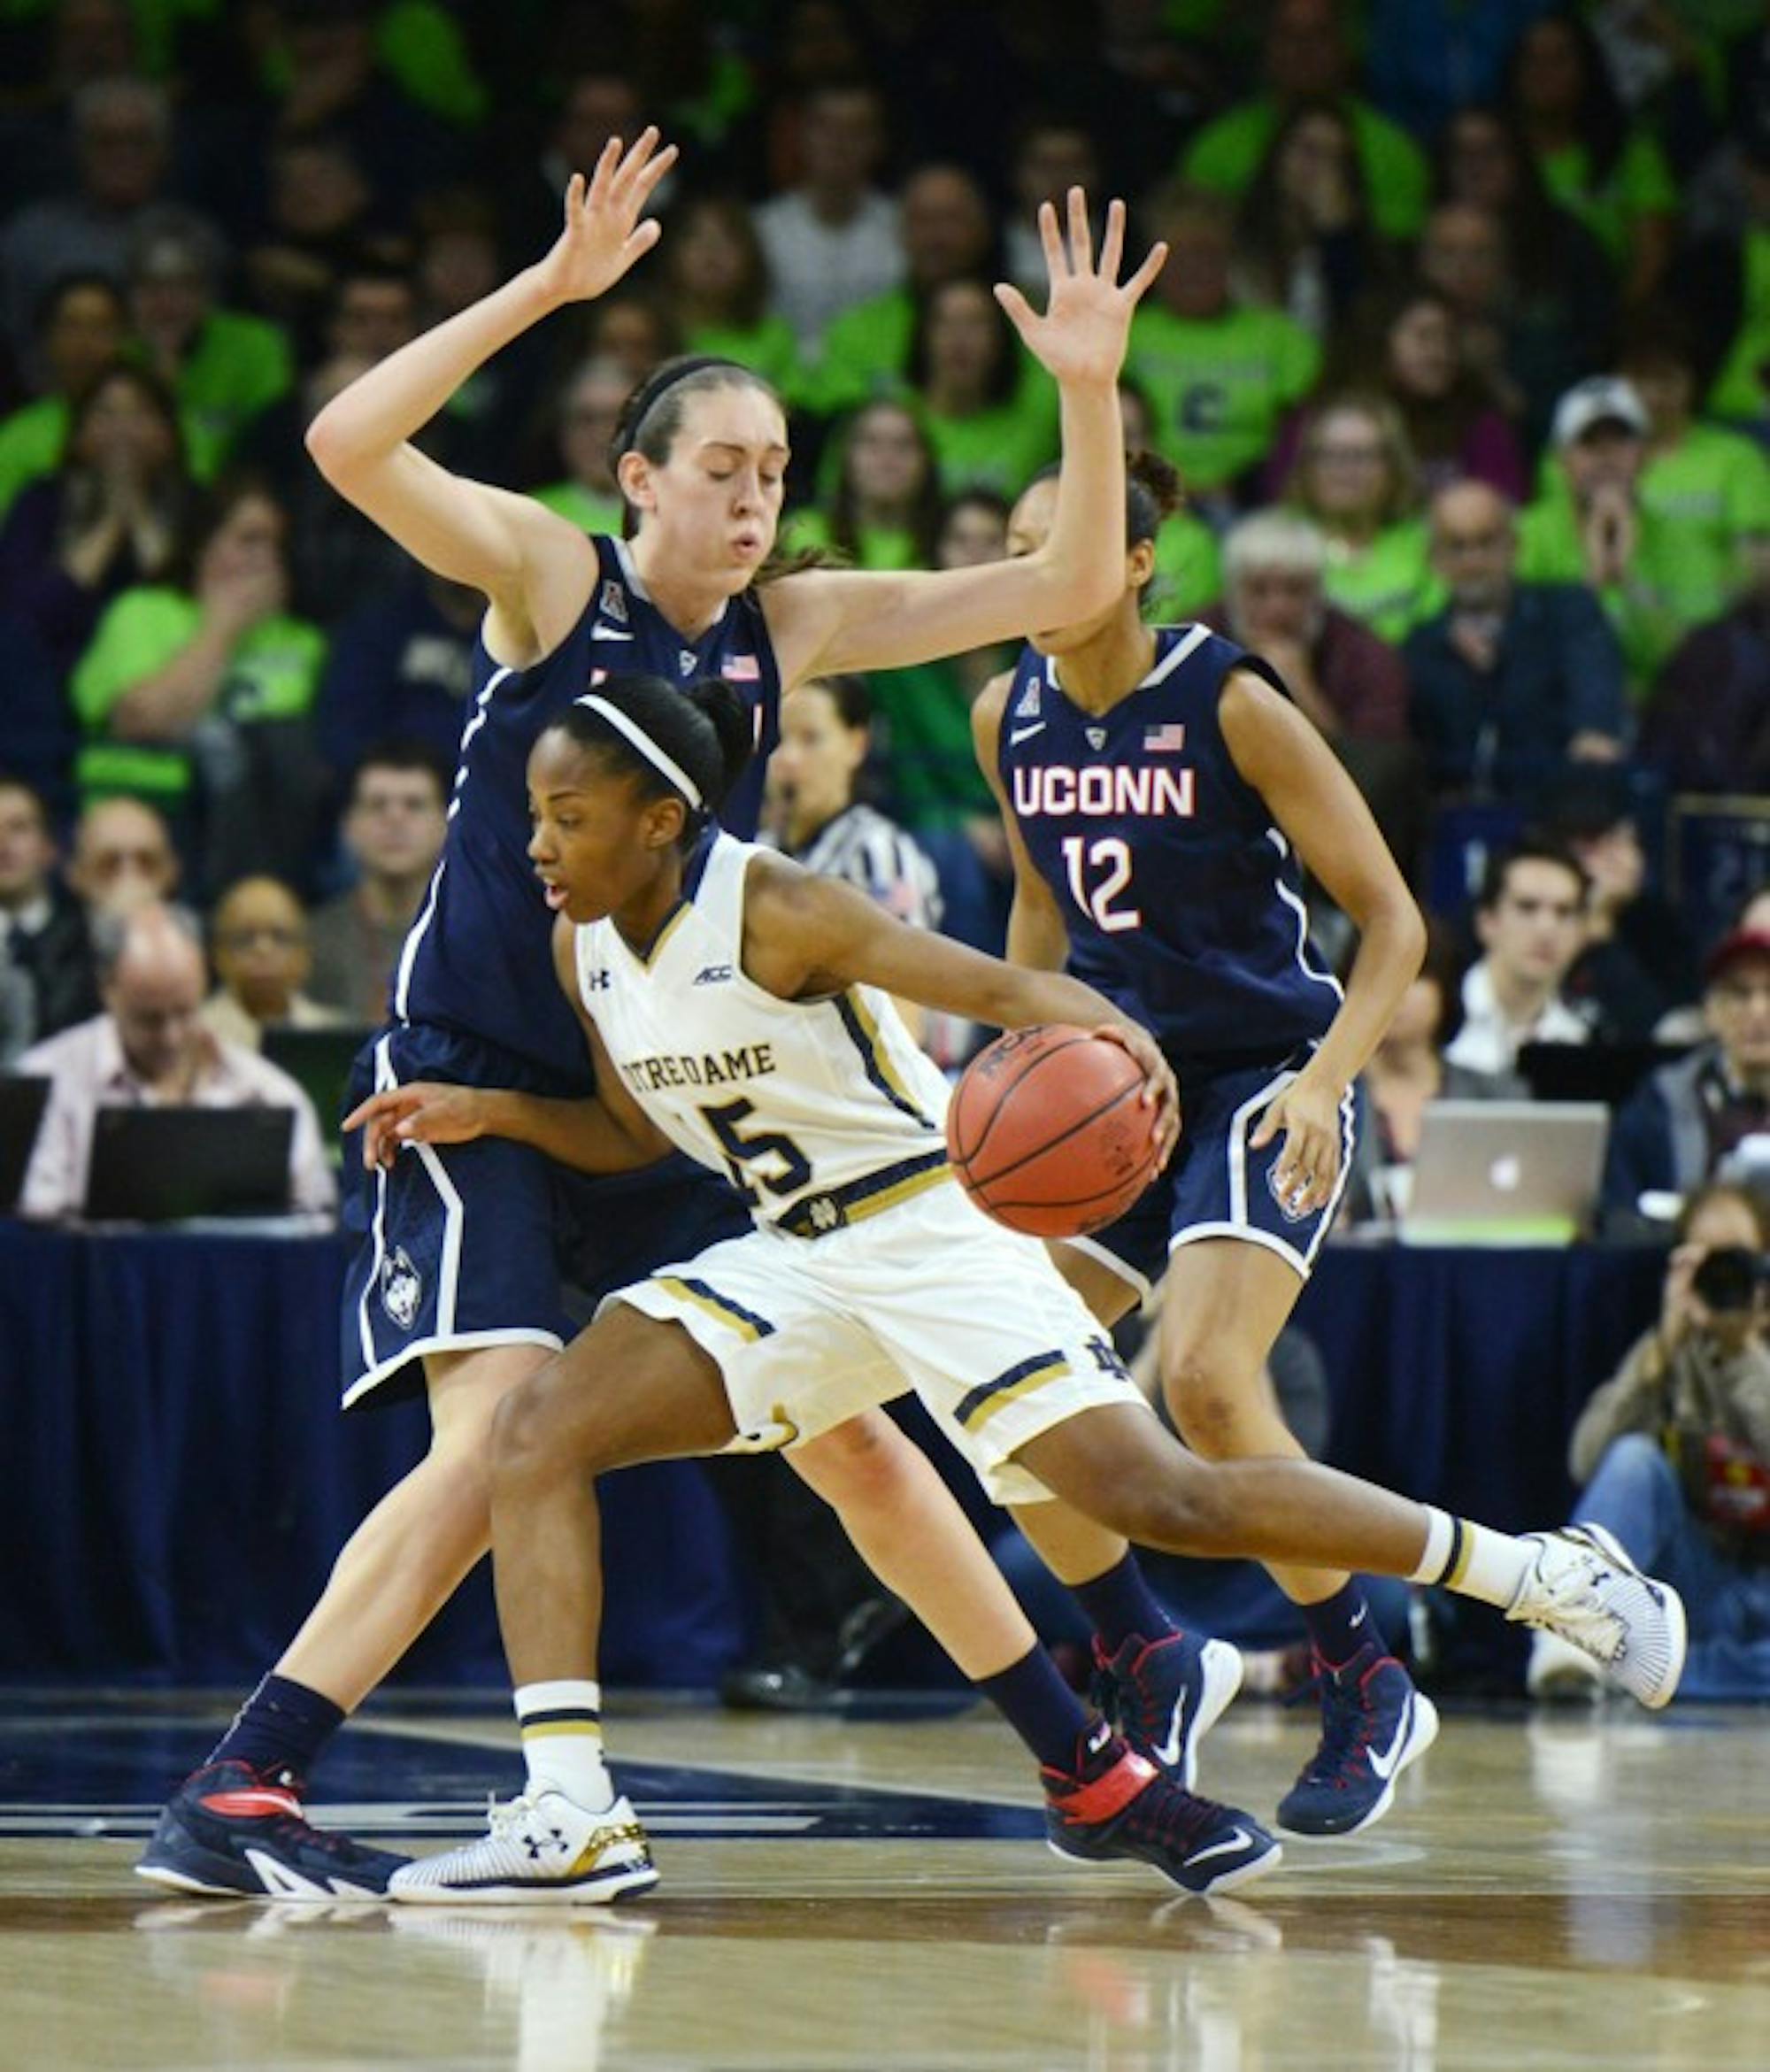 Irish guard Lindsay Allen tries to get around Huskies junior forward Breana Stewart during Notre Dame’s 76-58 loss to Connecticut on Saturday at Purcell Pavilion.